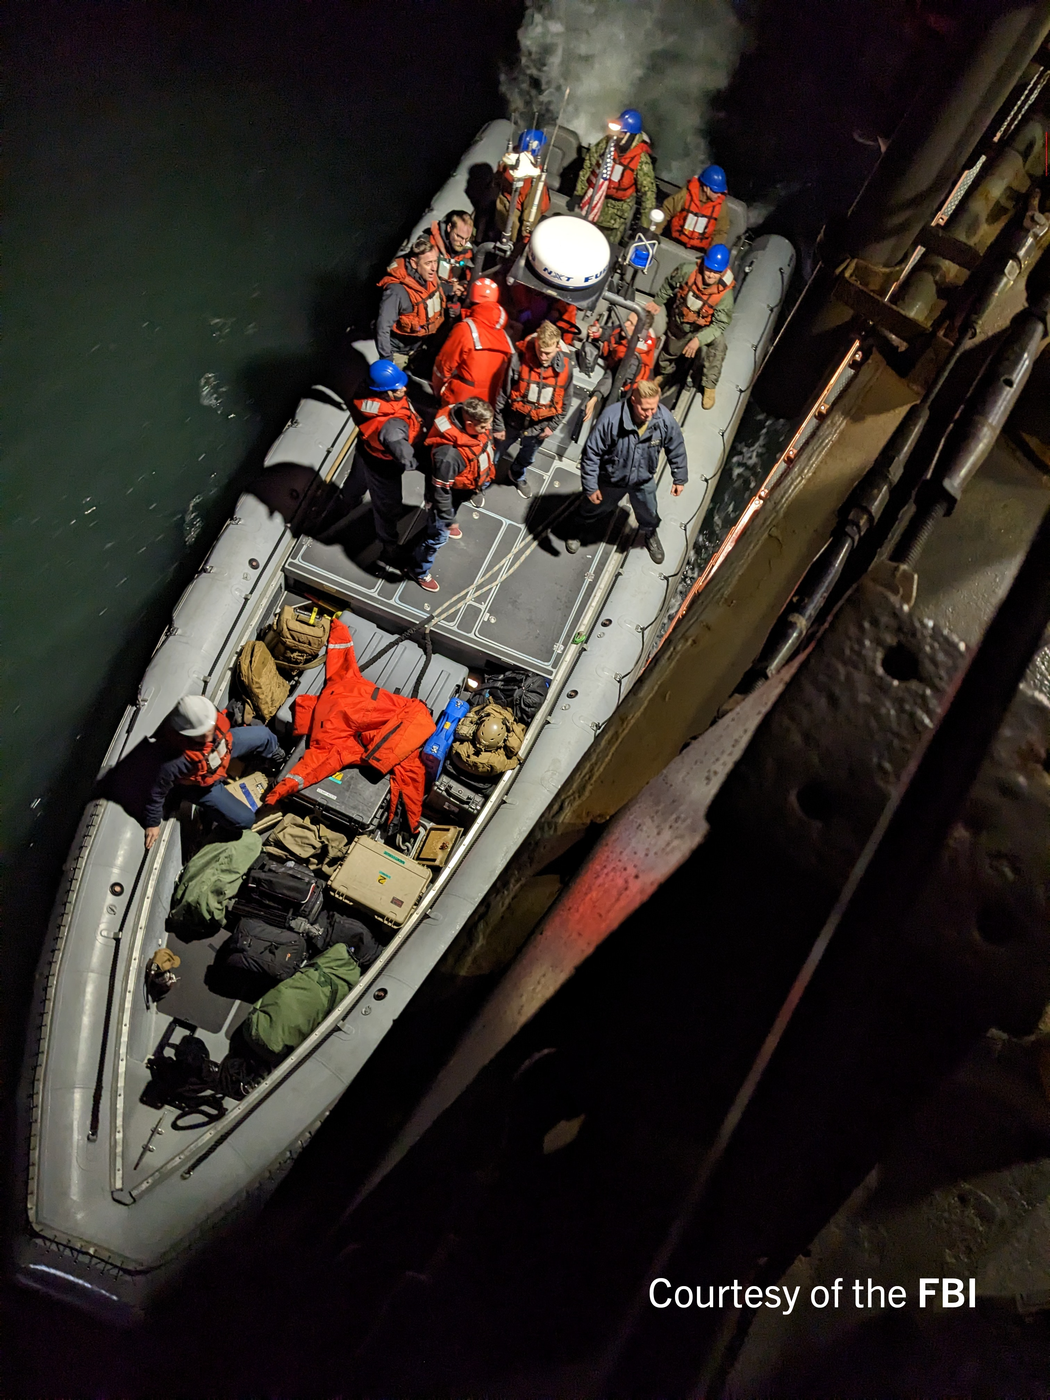 FBI Subject Matter Experts from LD, OTD and CIRG prepare to board the USS Carter Hull to conduct search and recovery operations in collaboration with the US Navy.